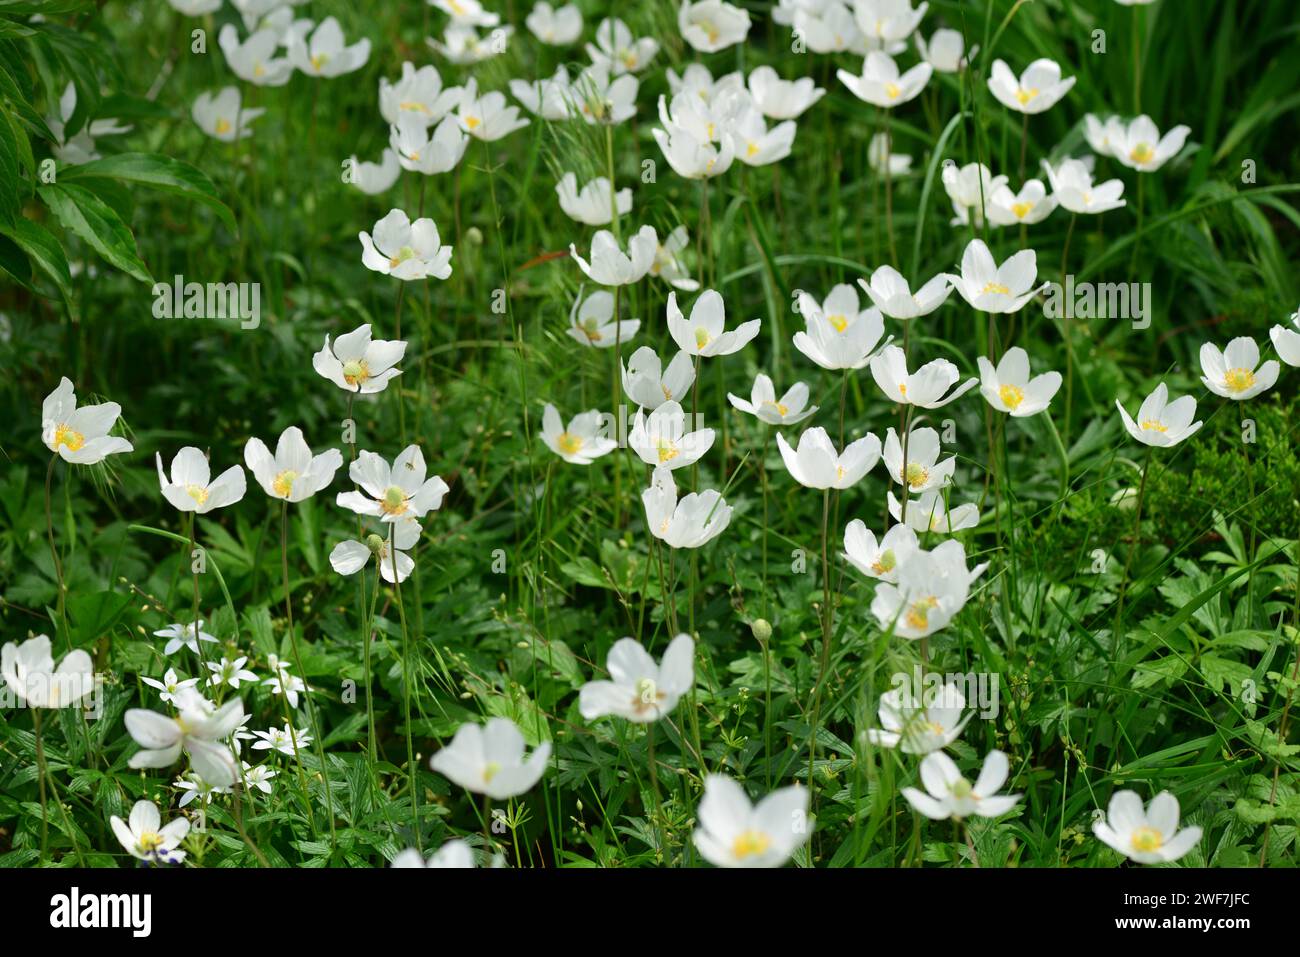 Group of white spring anemone woodland flowers in the garden. Stock Photo